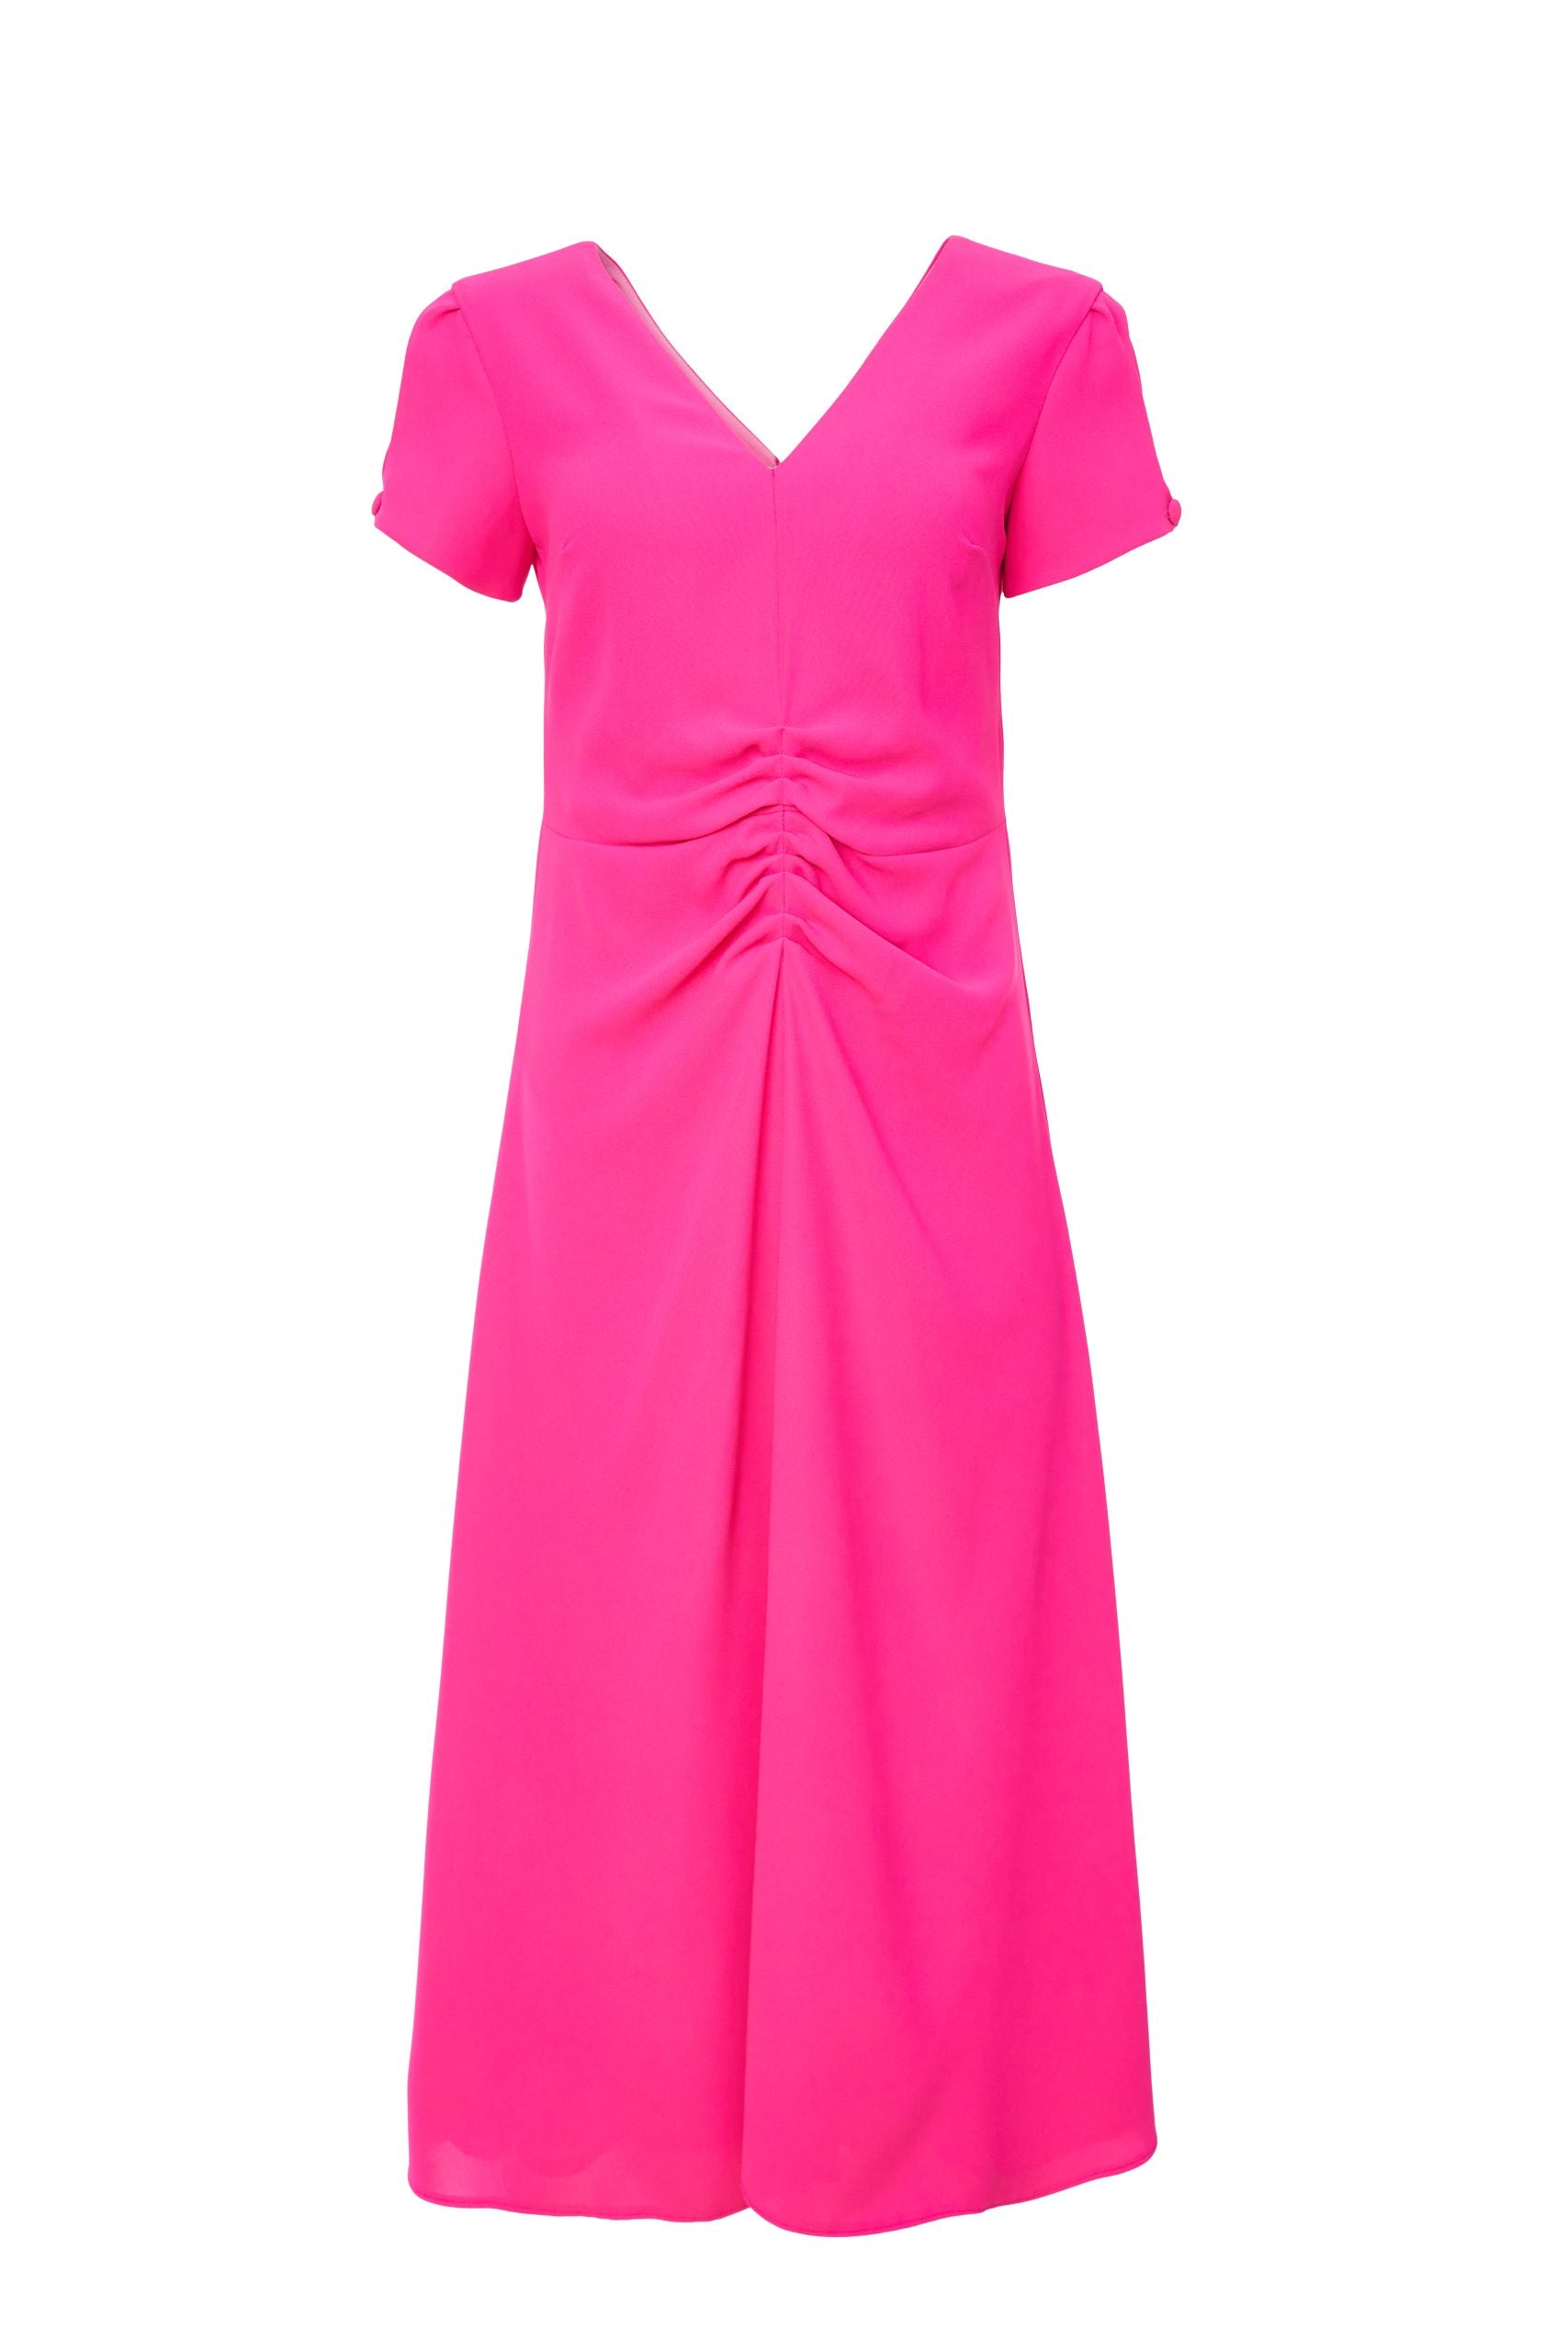 V-Neck Gathered Dress in Water Melon Pink